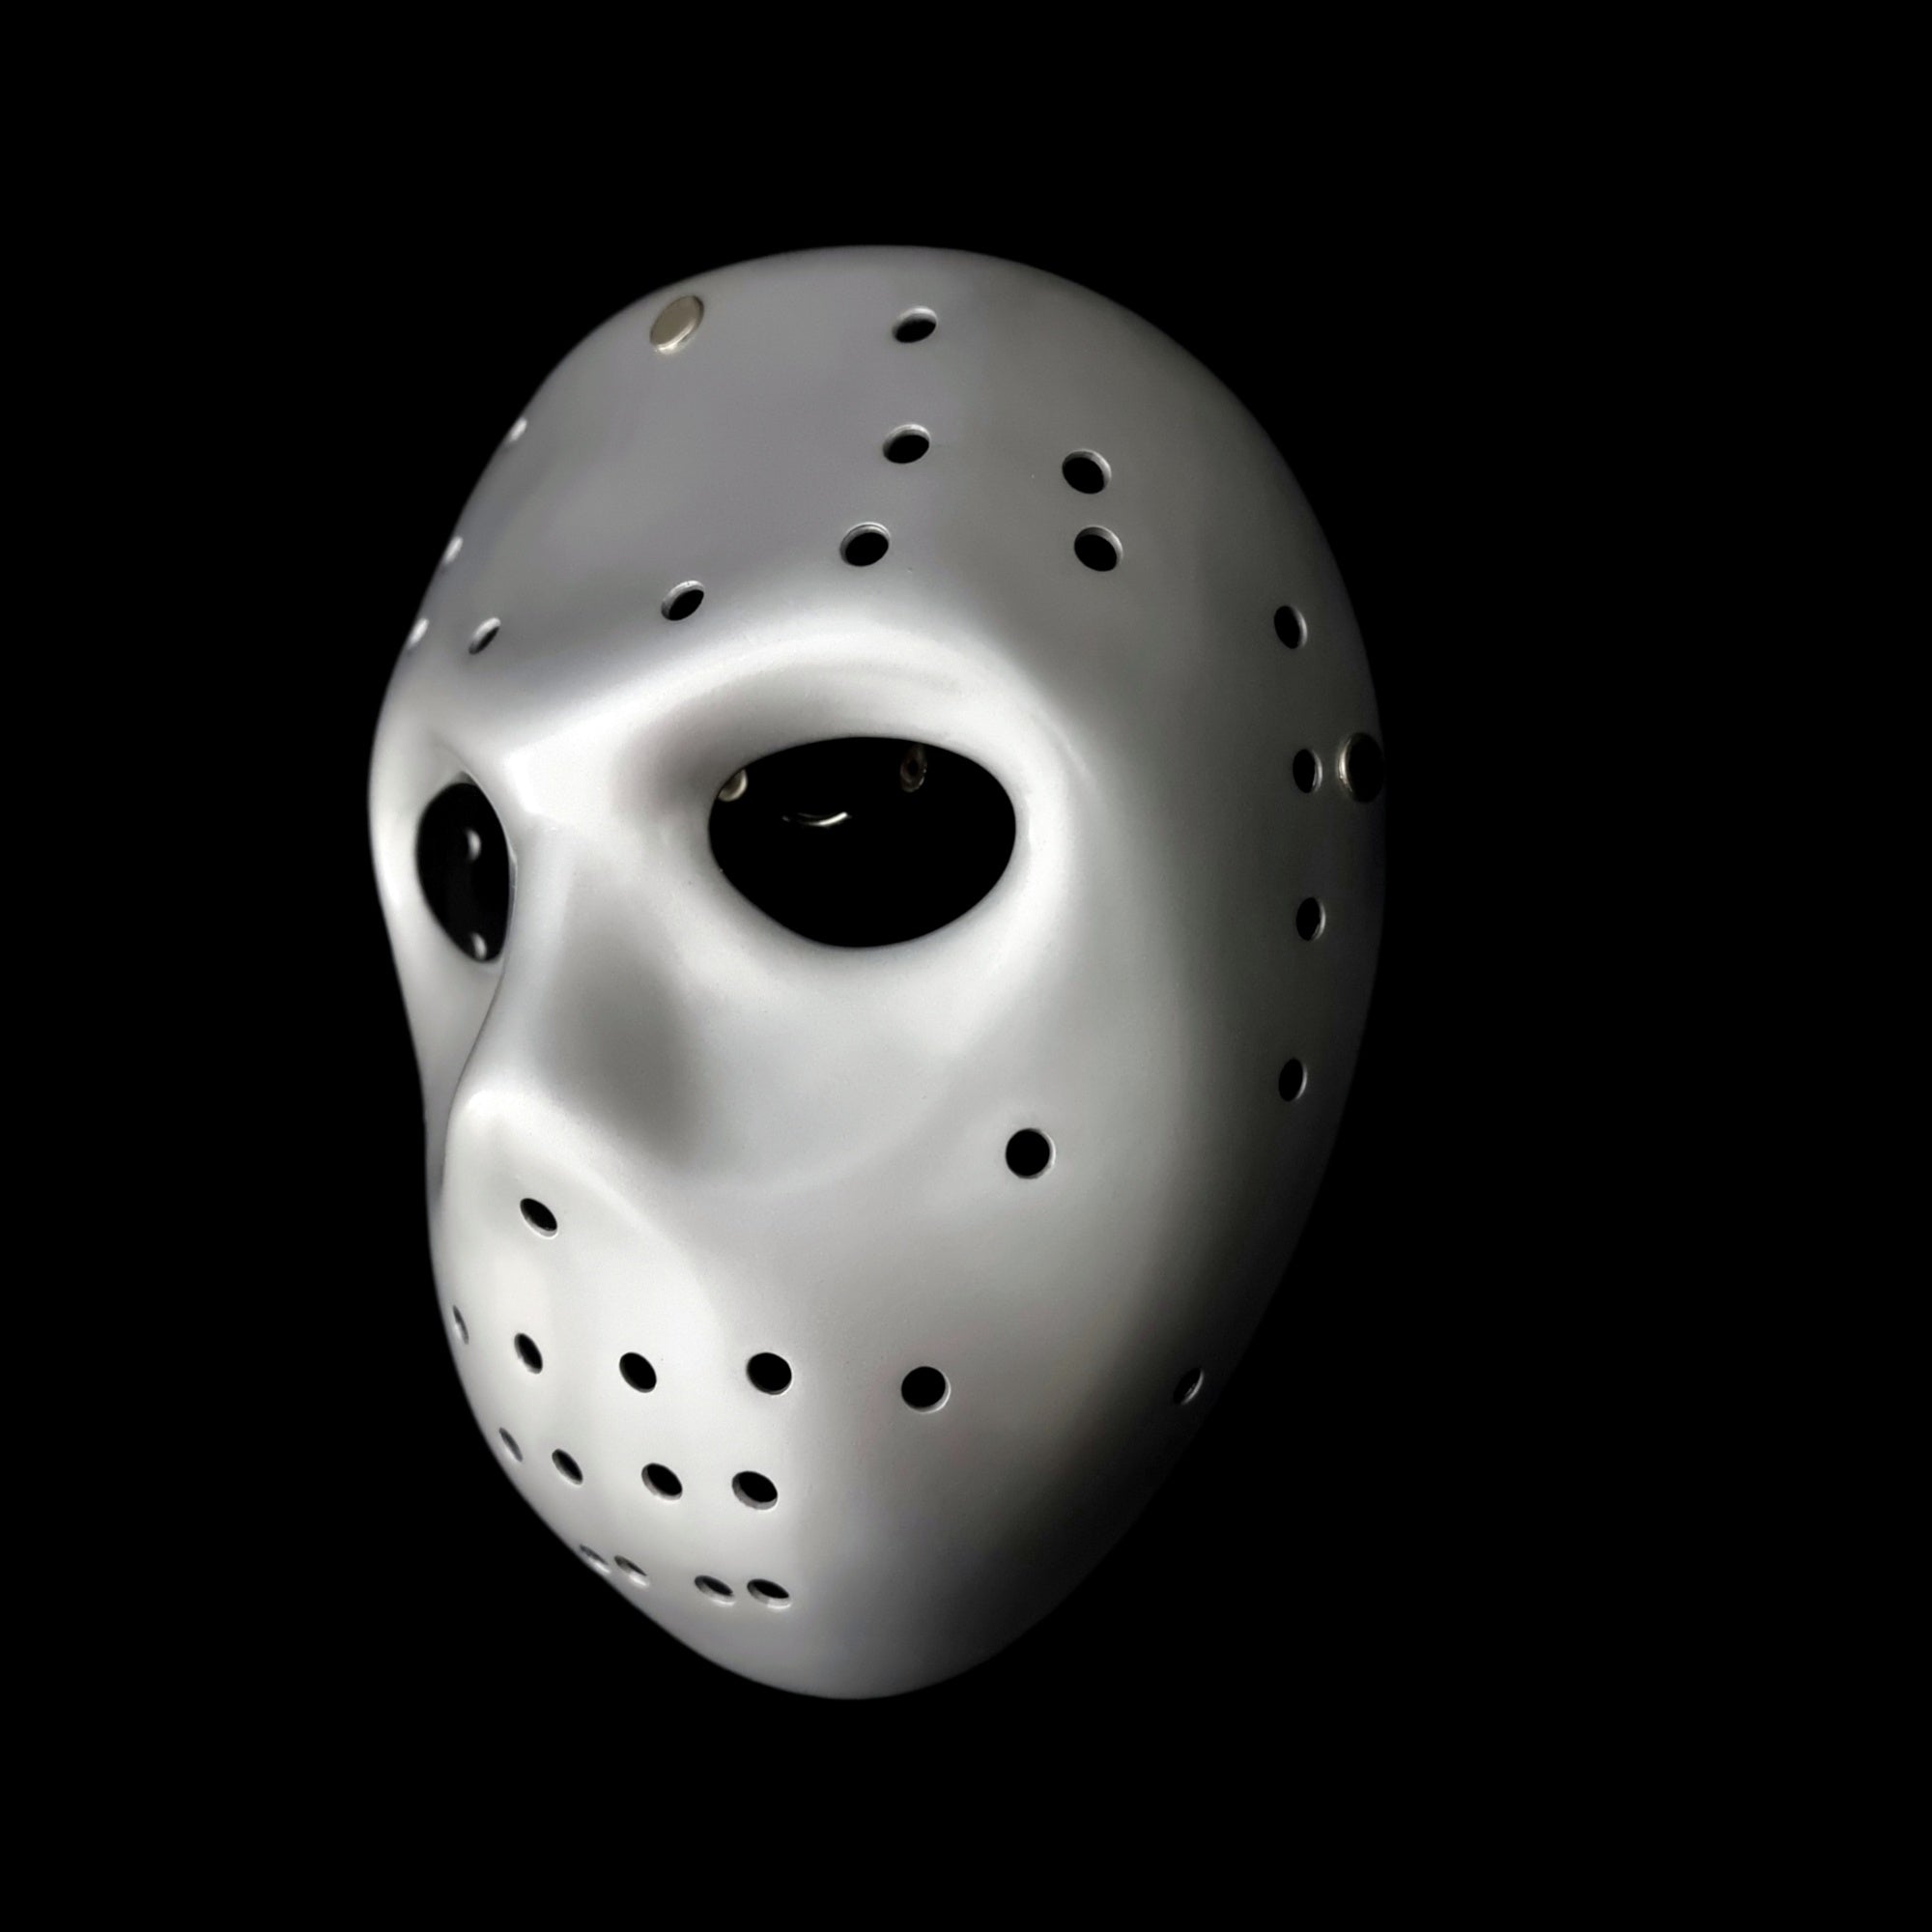 friday the 13th part 9 mask